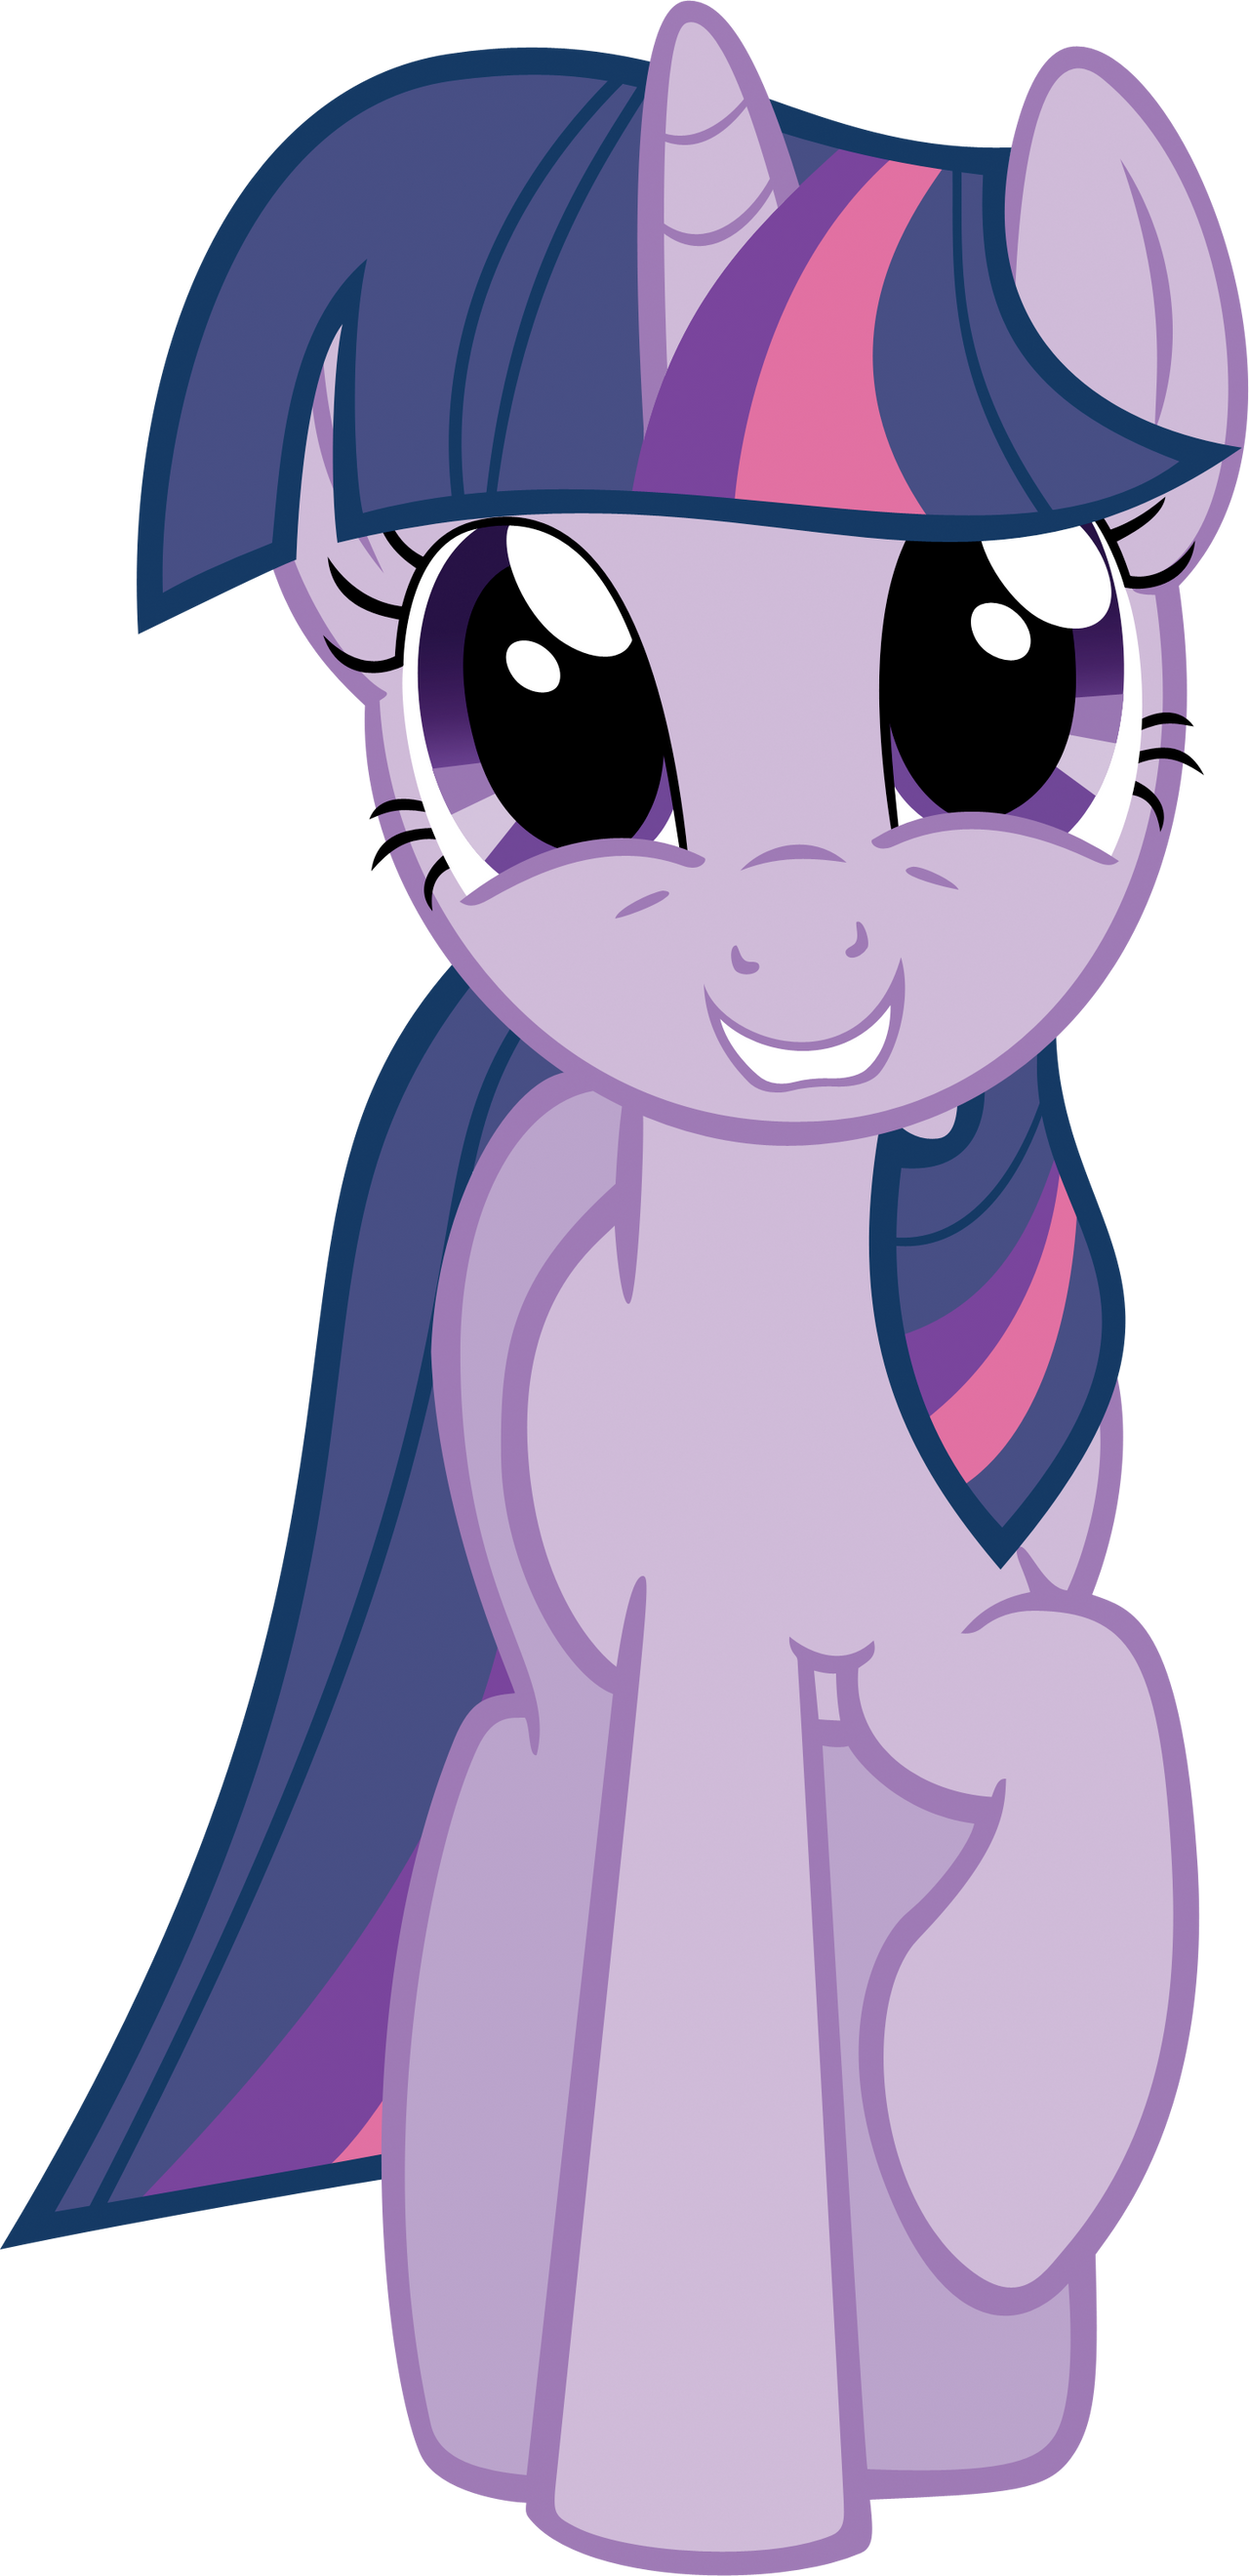 twilight_is_happy_by_moongazeponies-d3gd